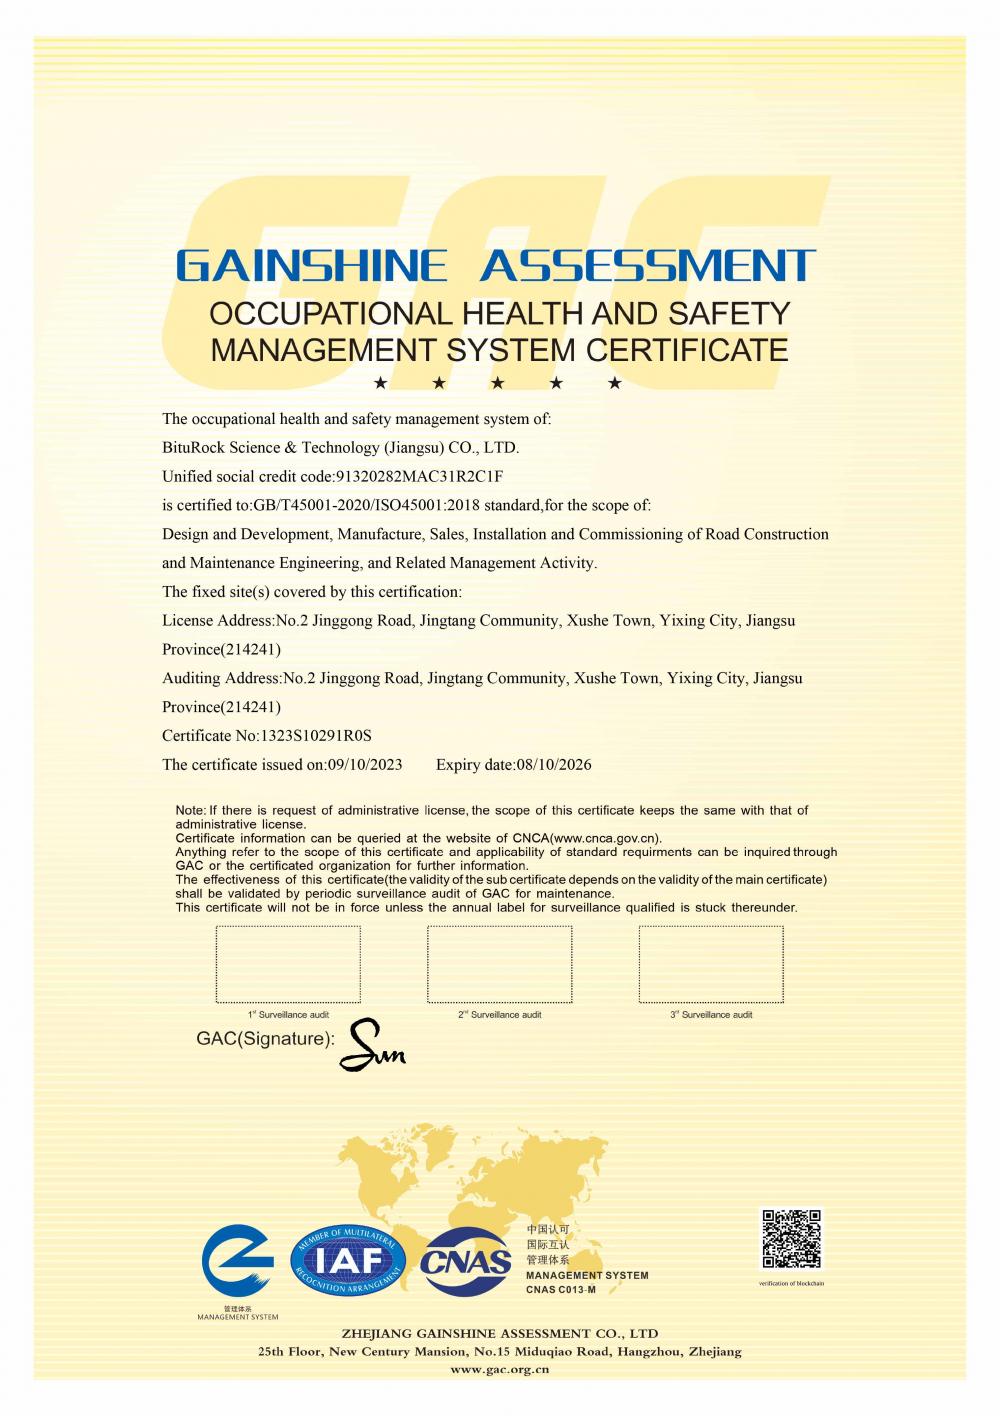 OCCUPATIONAL HEALTH AND SAFETYMANAGEMENT SYSTEM CERTIFICATE